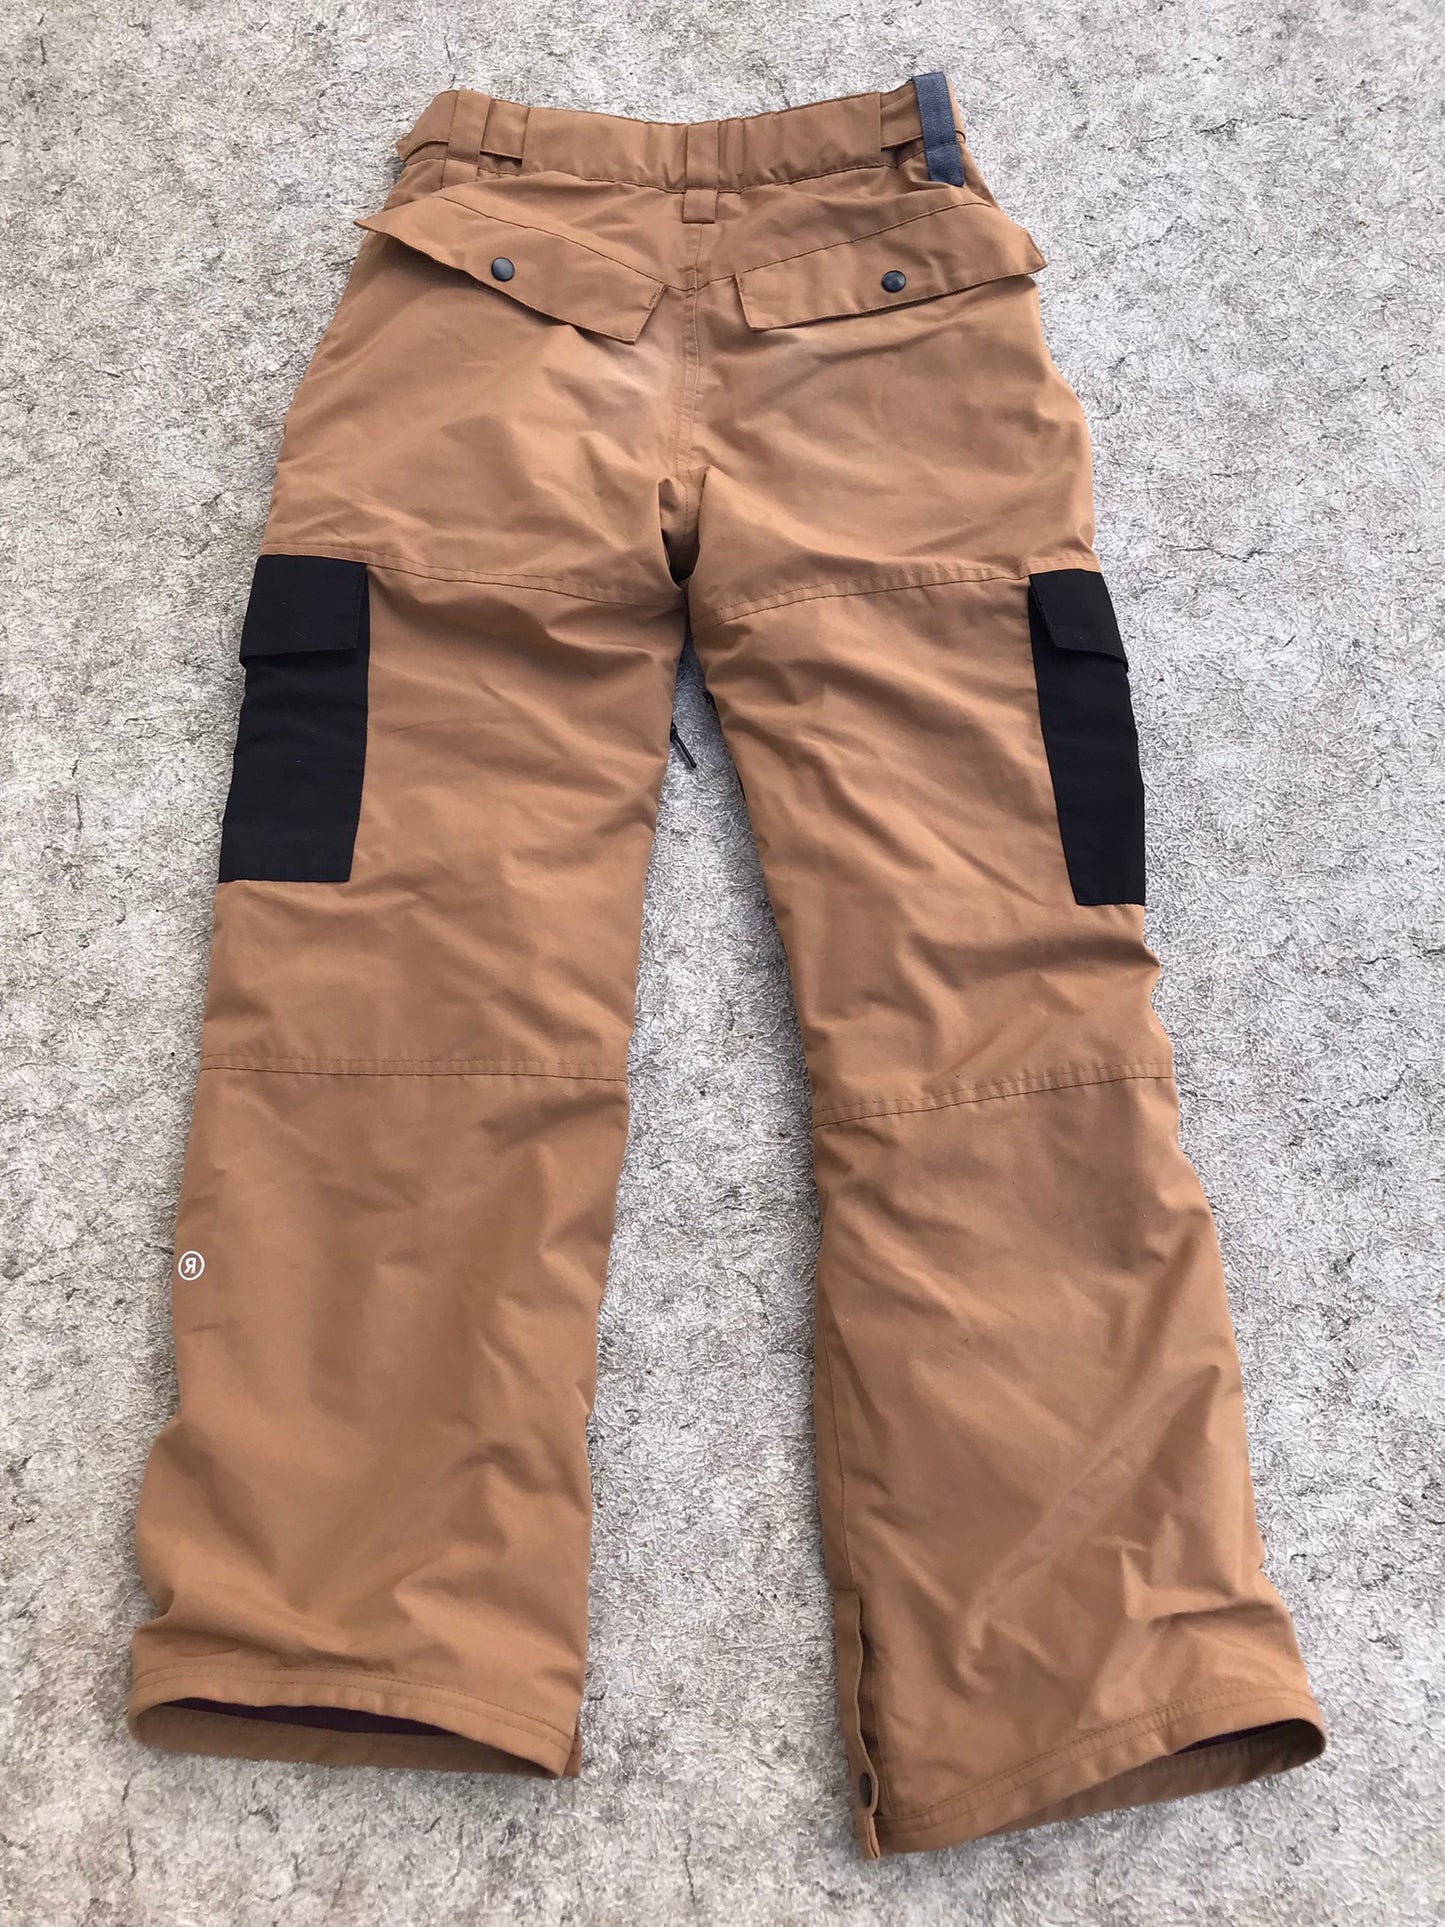 Snow Pants Men's Size Small Ride Snowboarding Fantastic Quality Brown Black